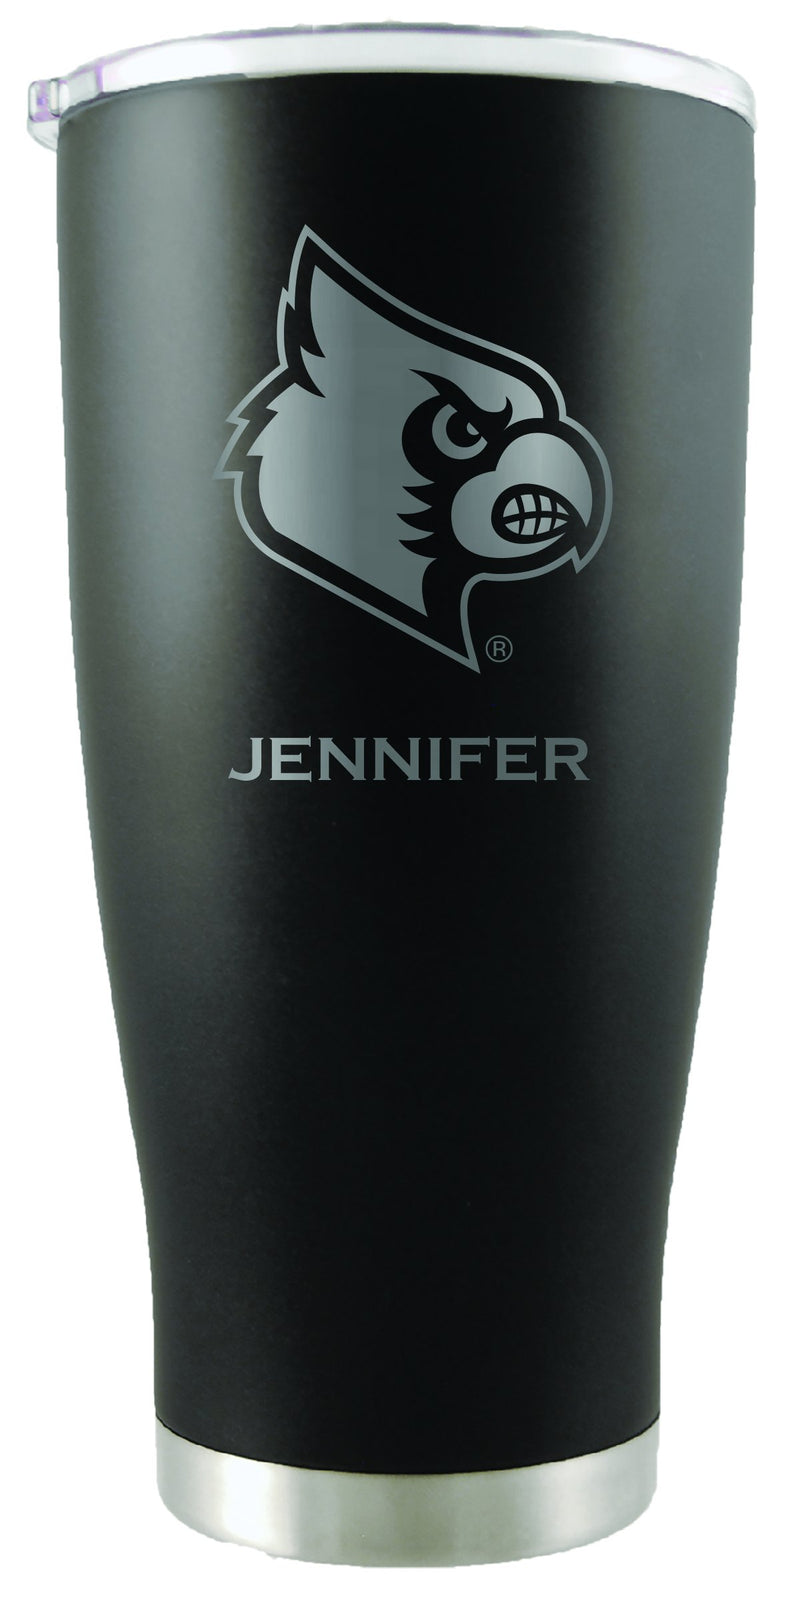 20oz Black Personalized Stainless Steel Tumbler | Louisville Cardinals
COL, CurrentProduct, Drinkware_category_All, LOU, Louisville Cardinals, Personalized_Personalized
The Memory Company